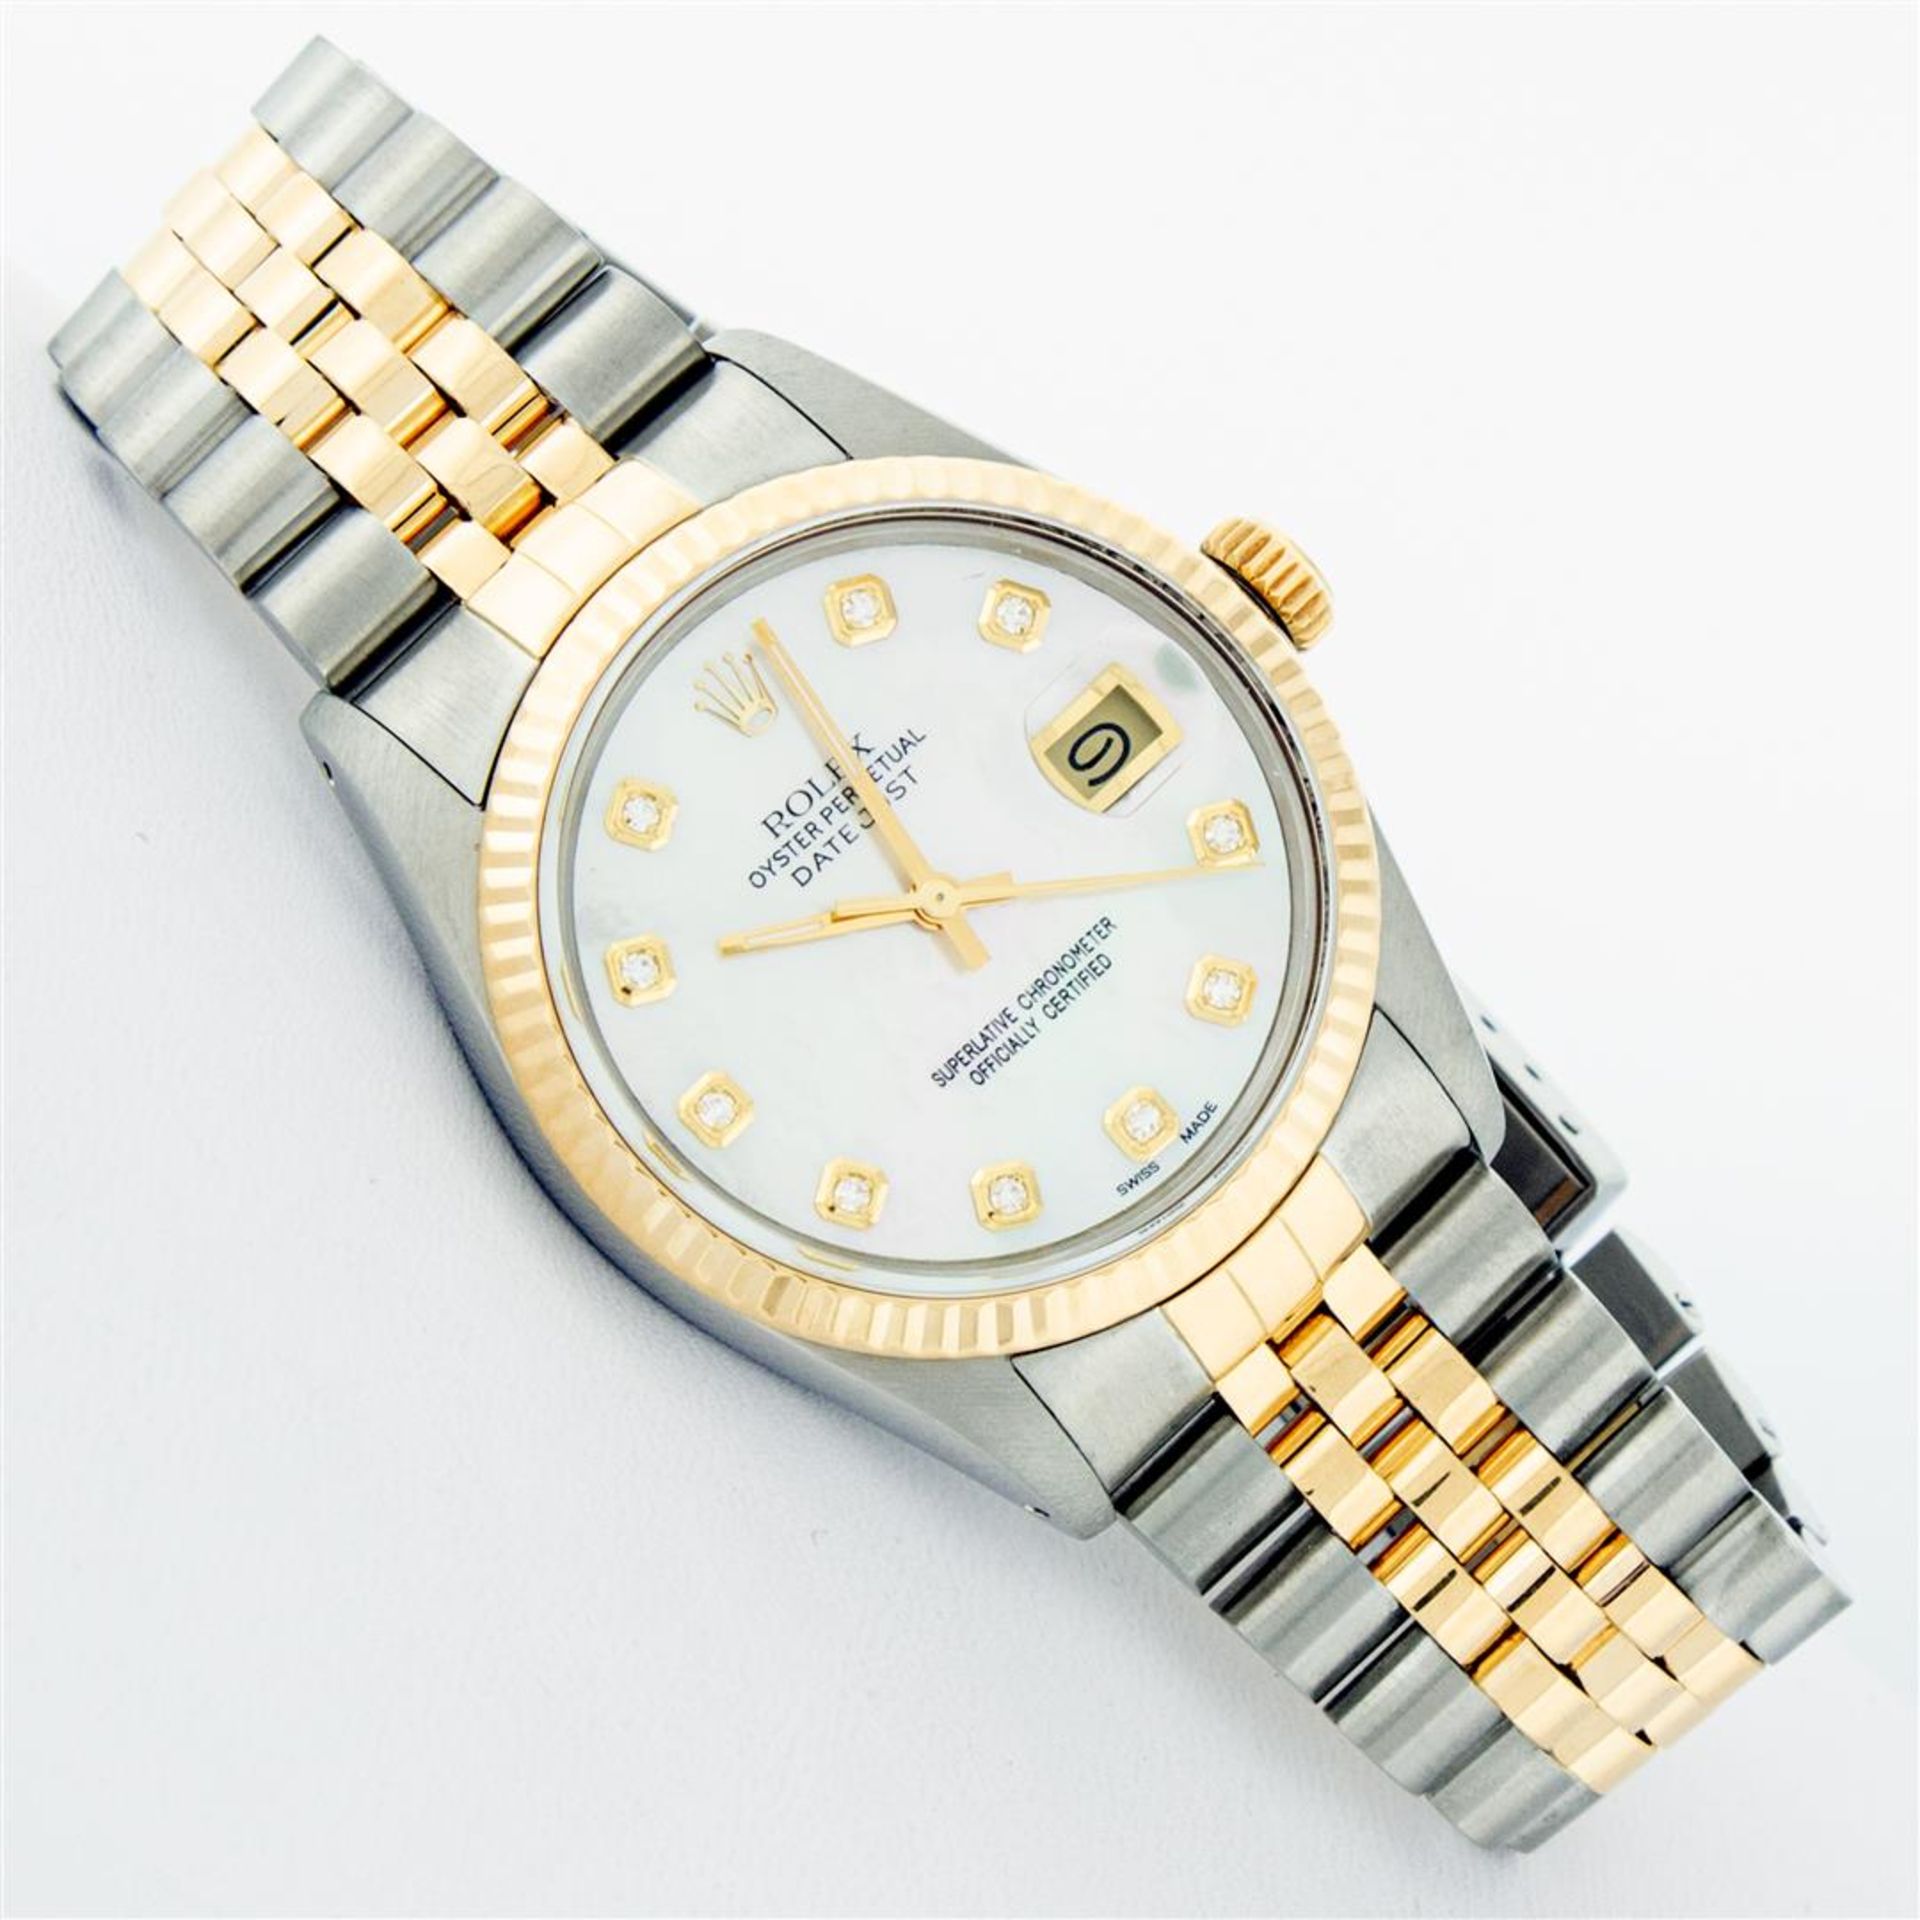 Rolex Mens 2 Tone Mother Of Pearl VS Diamond 36MM Datejust Wristwatch - Image 6 of 18